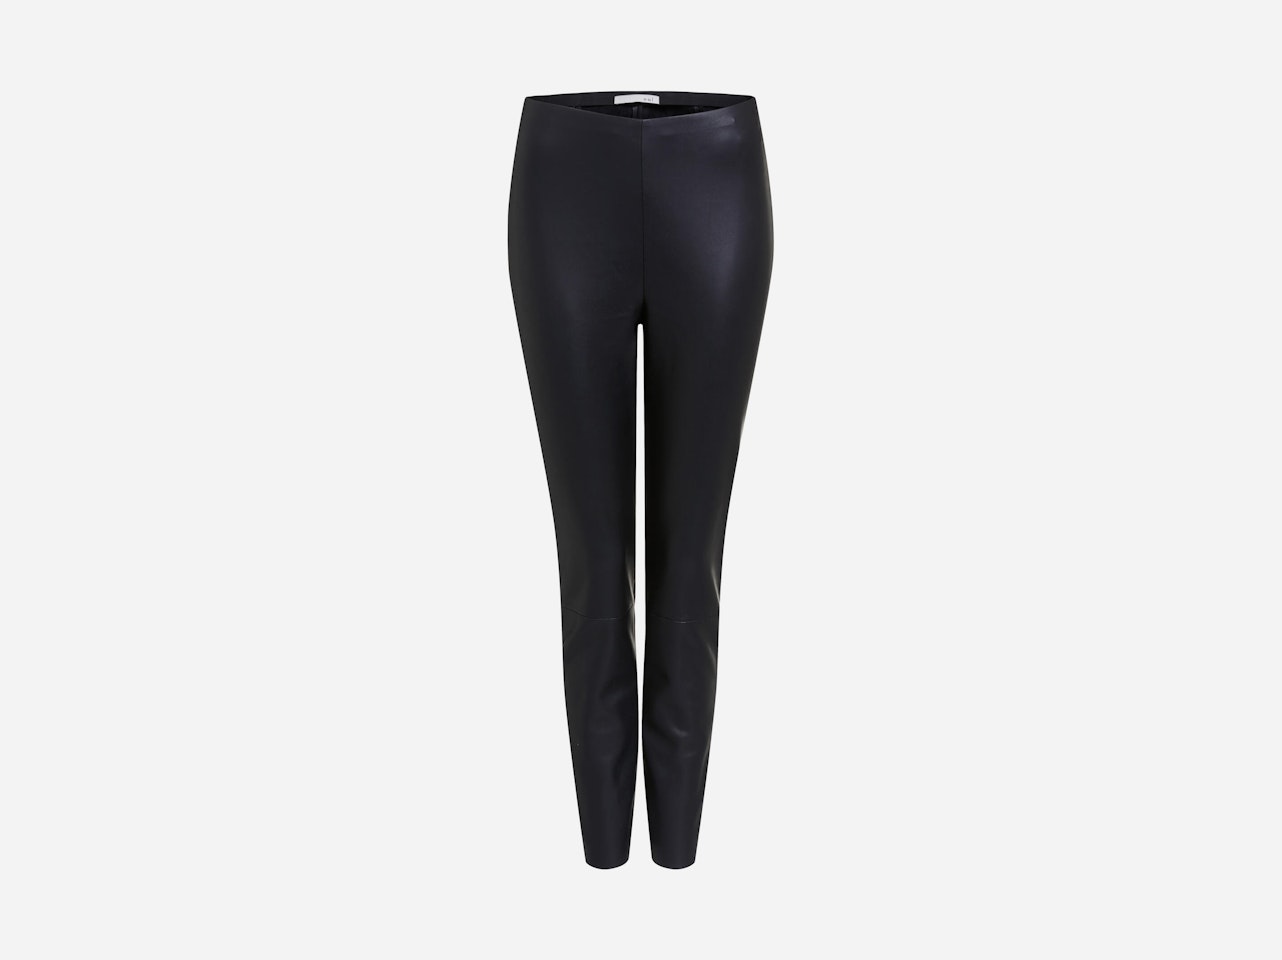 CHASEY Leggings made from vegan leather